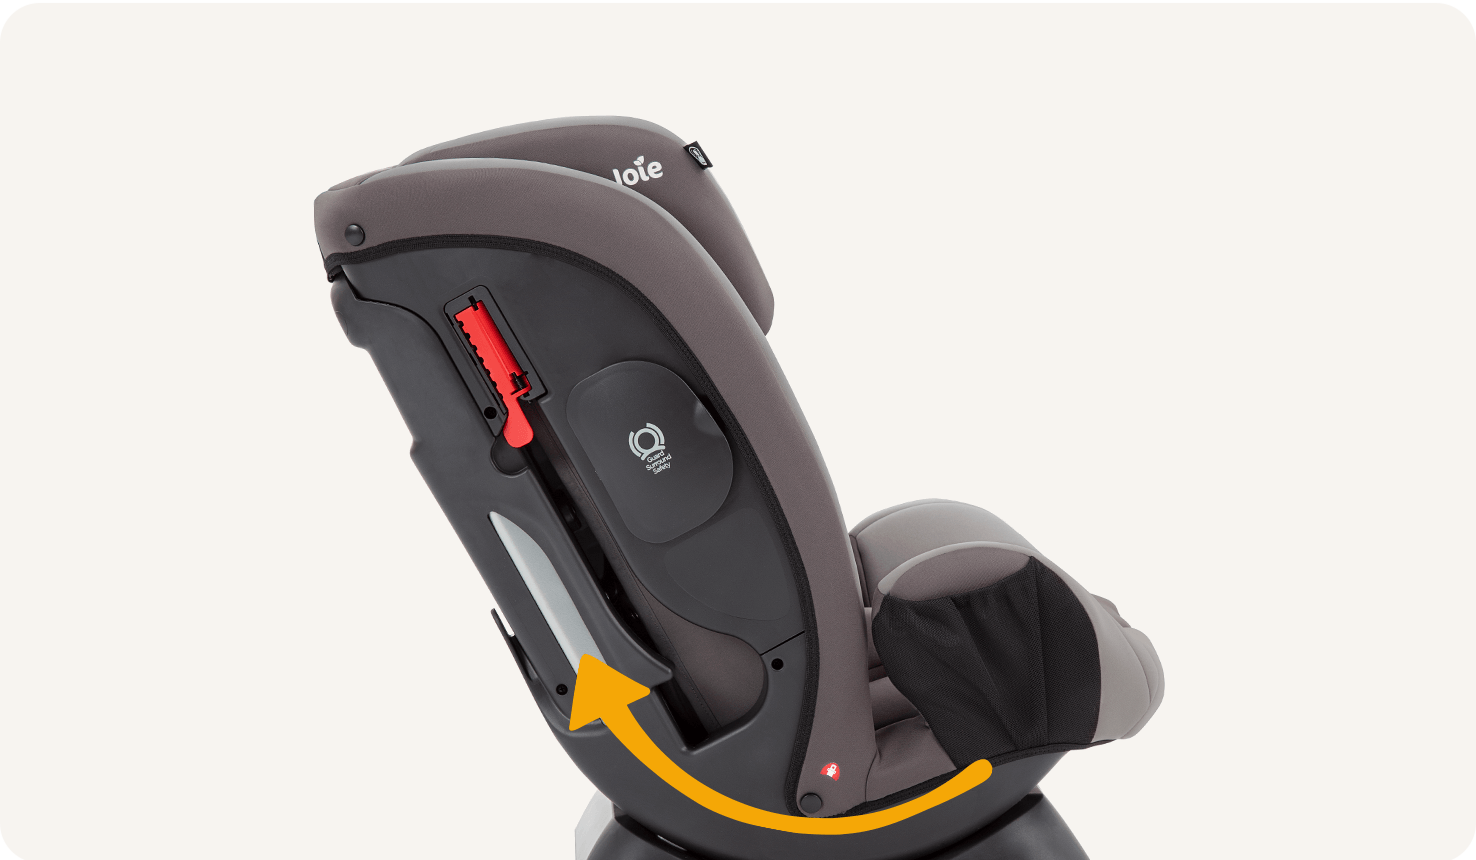 Right profile view of fortifi child car seat with an arrow along the bottom curve of the seat.